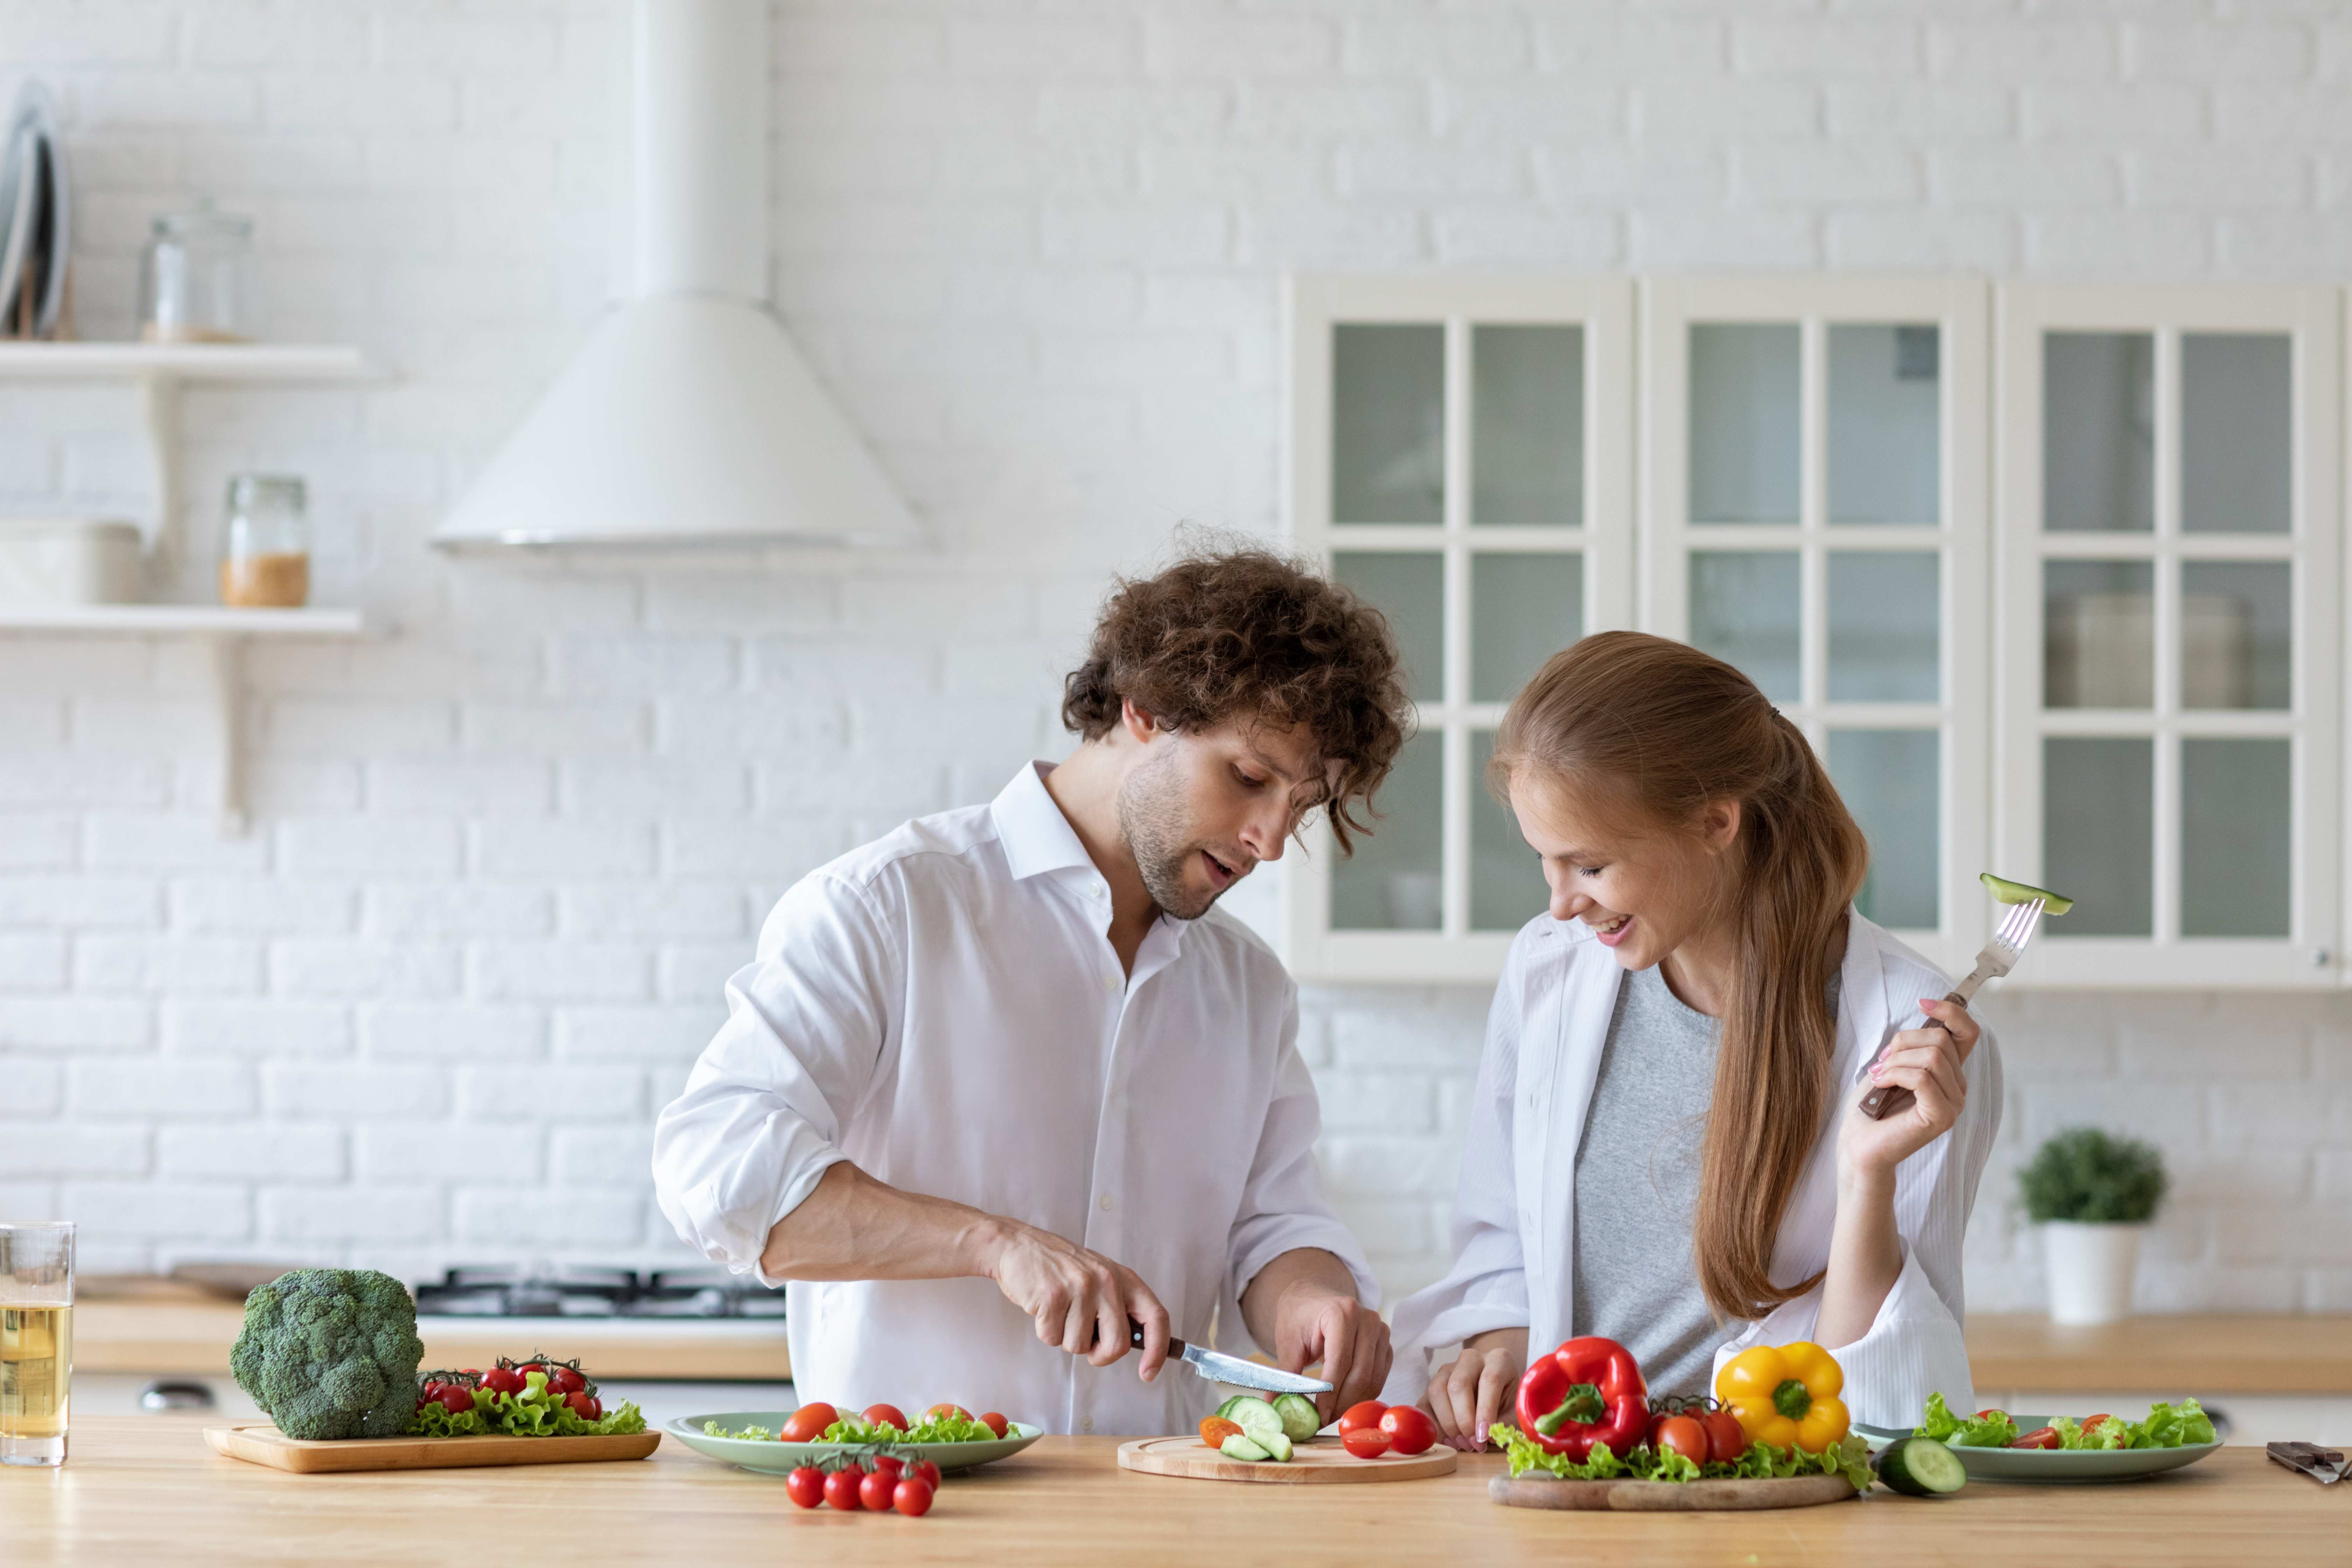 A happy couple stays healthy by cooking a meal at home with fresh ingredients.